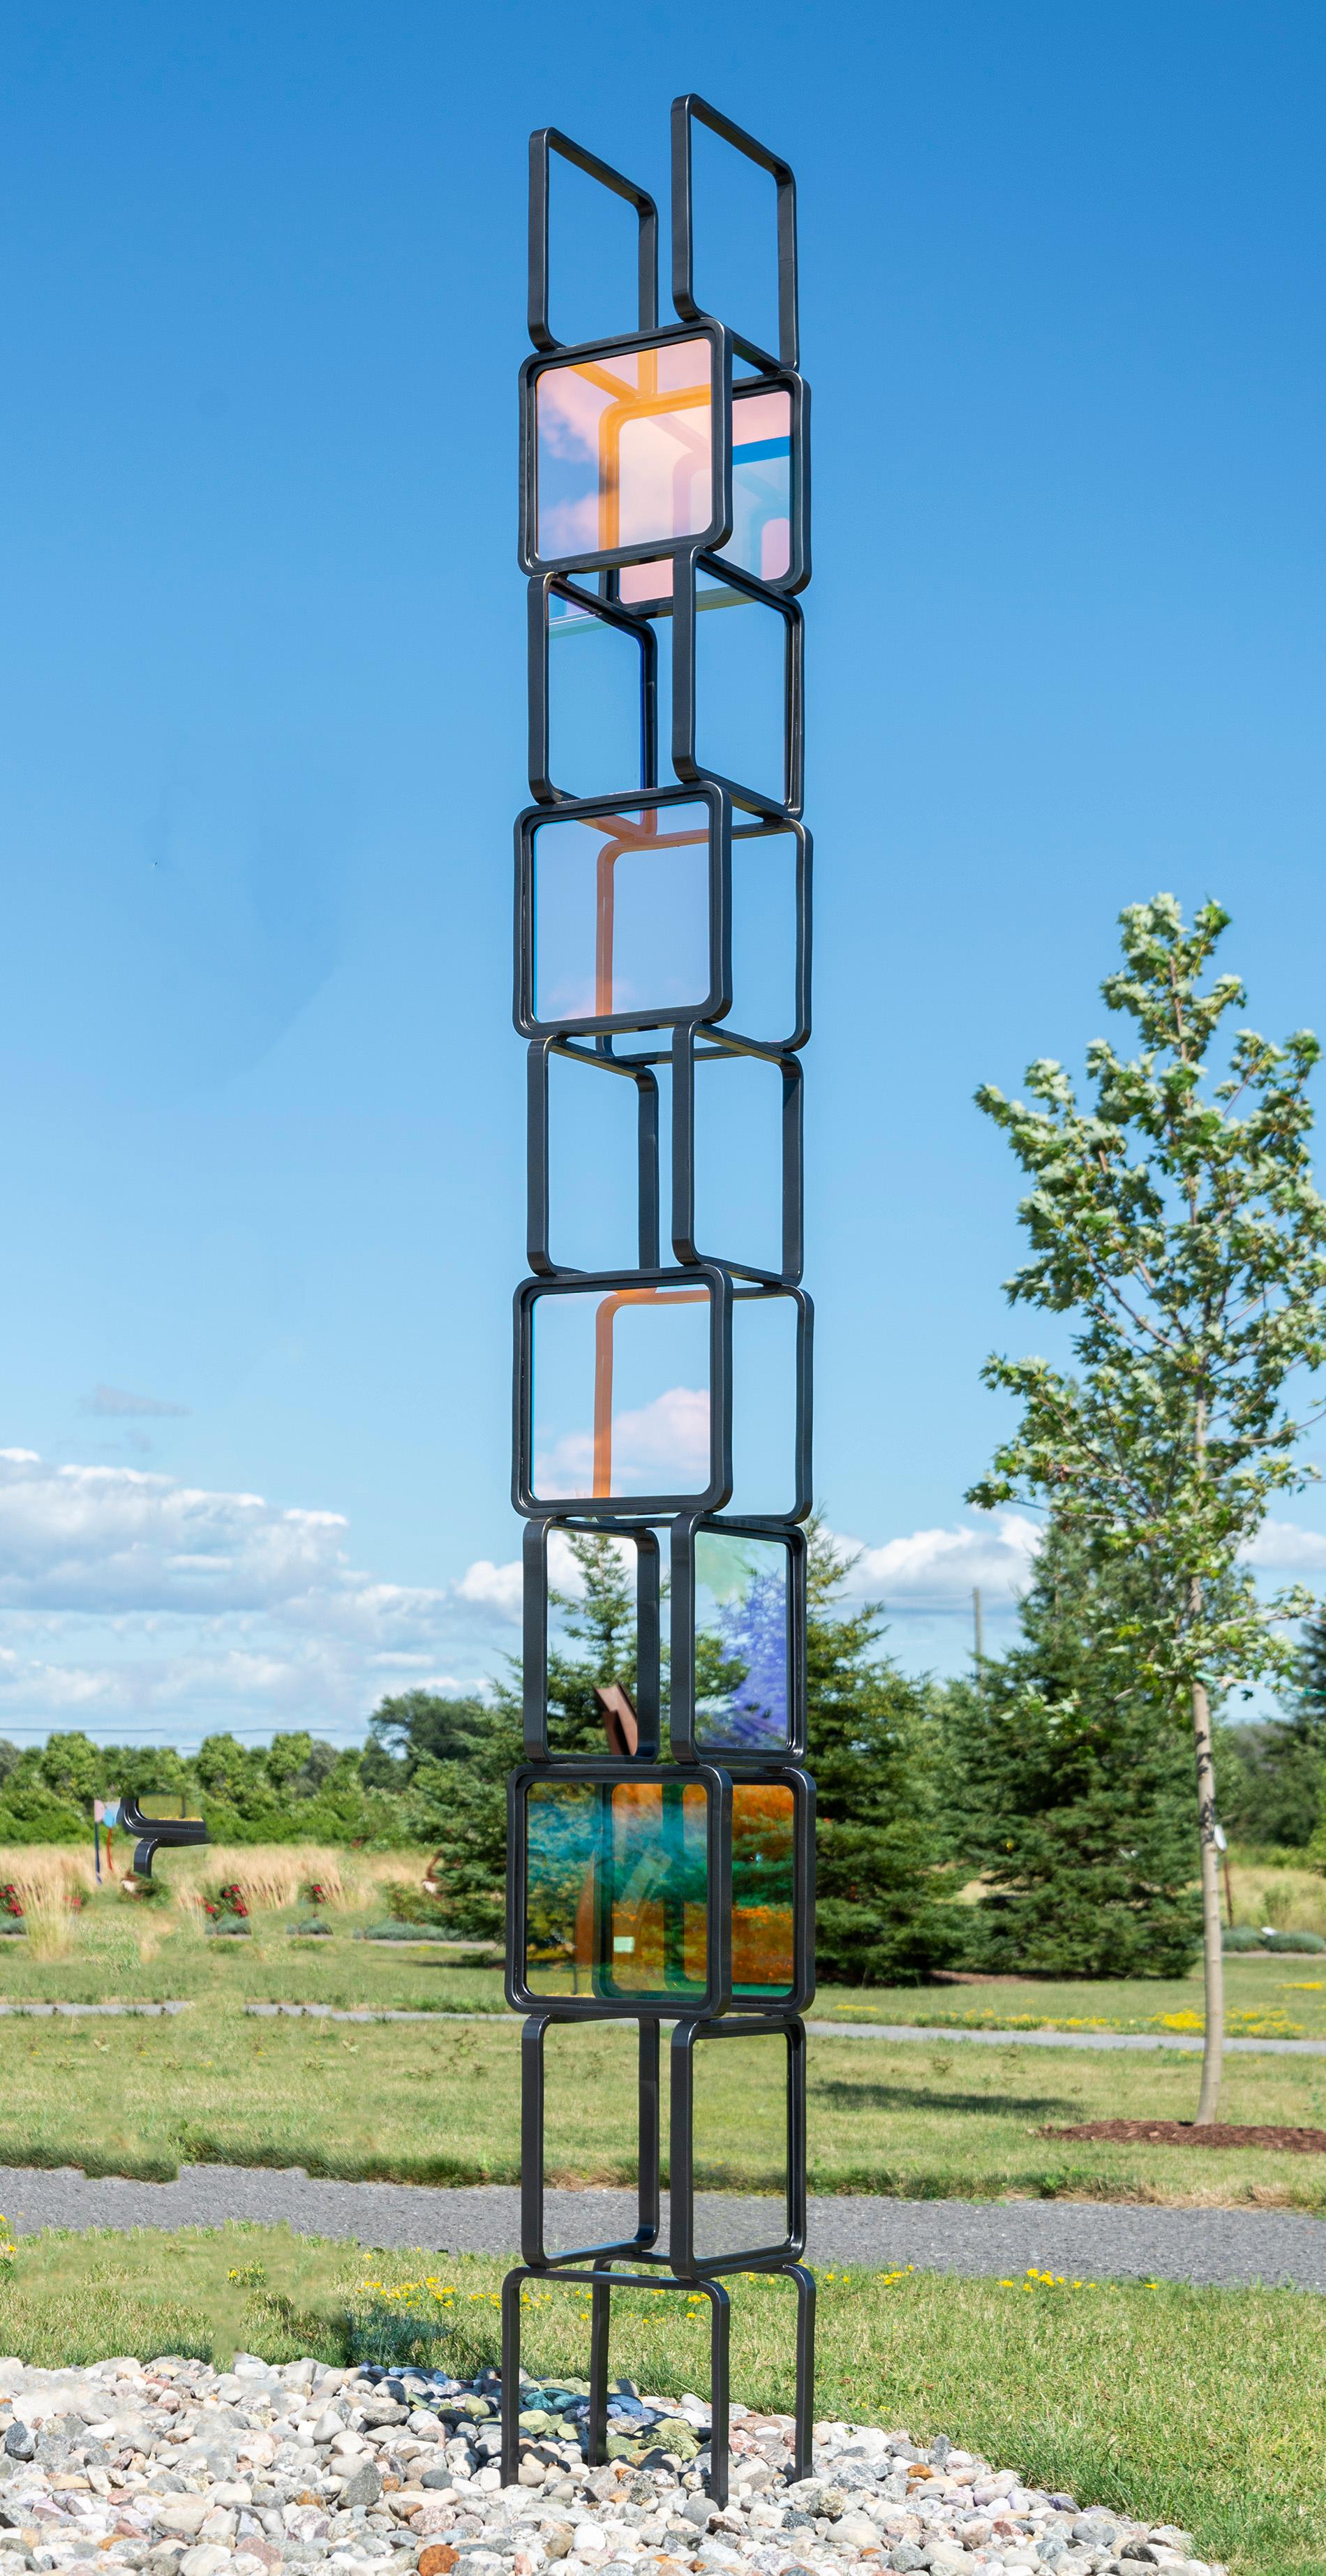 Ryan Van Der Hout Abstract Sculpture - Chroma Tower No 1 - tall, geometric abstract, steel and glass sculpture